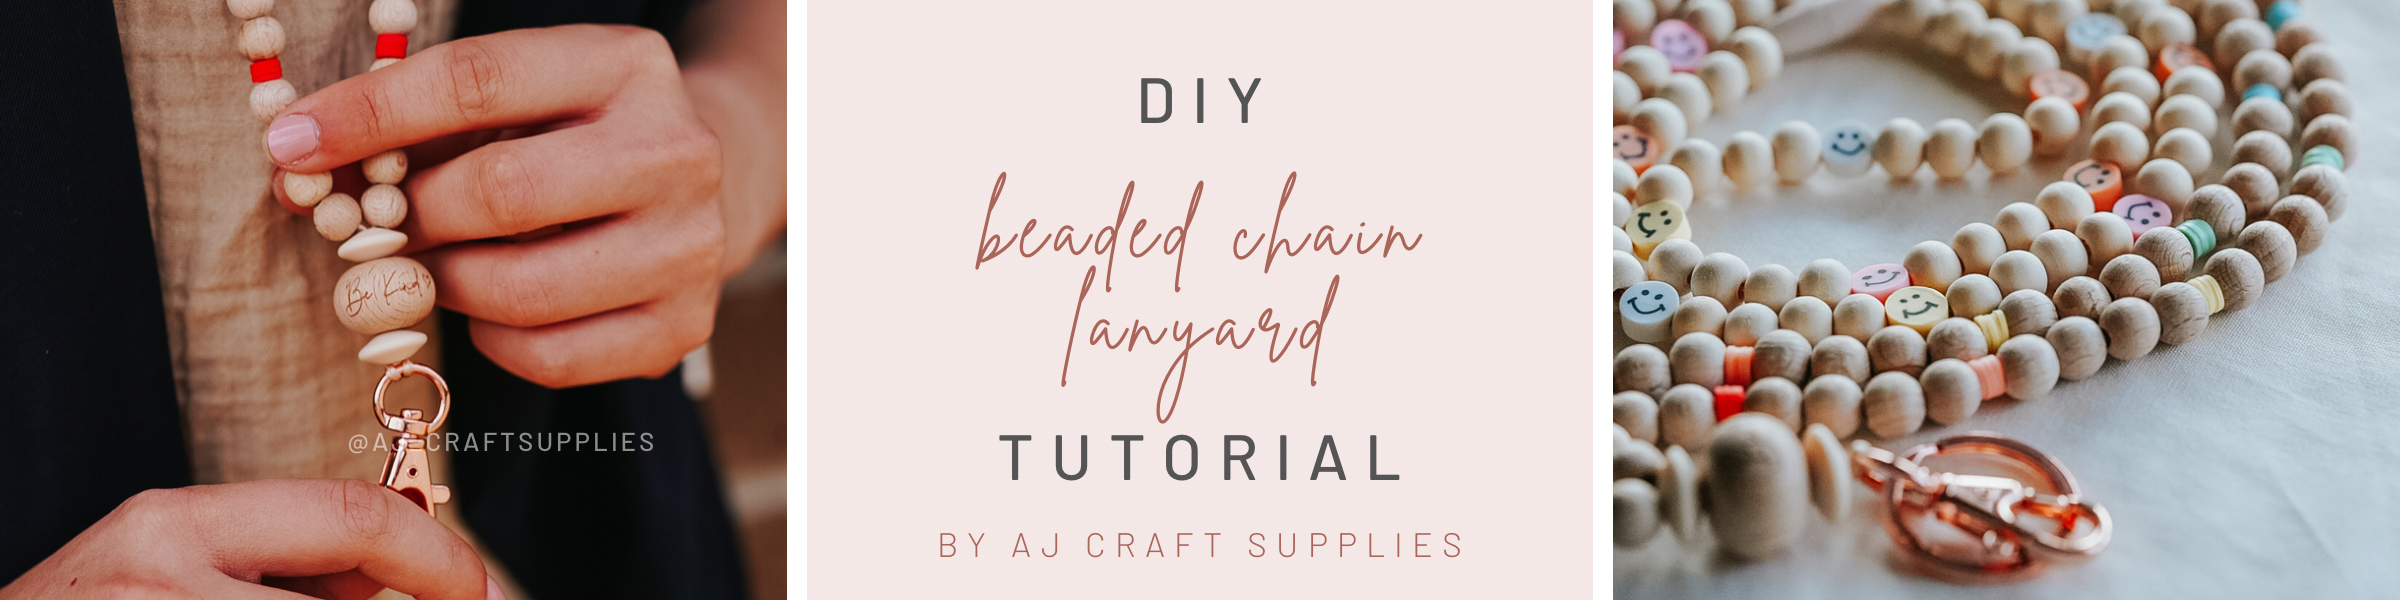 packaging orders clay beads/beaded jewelry compilation half of